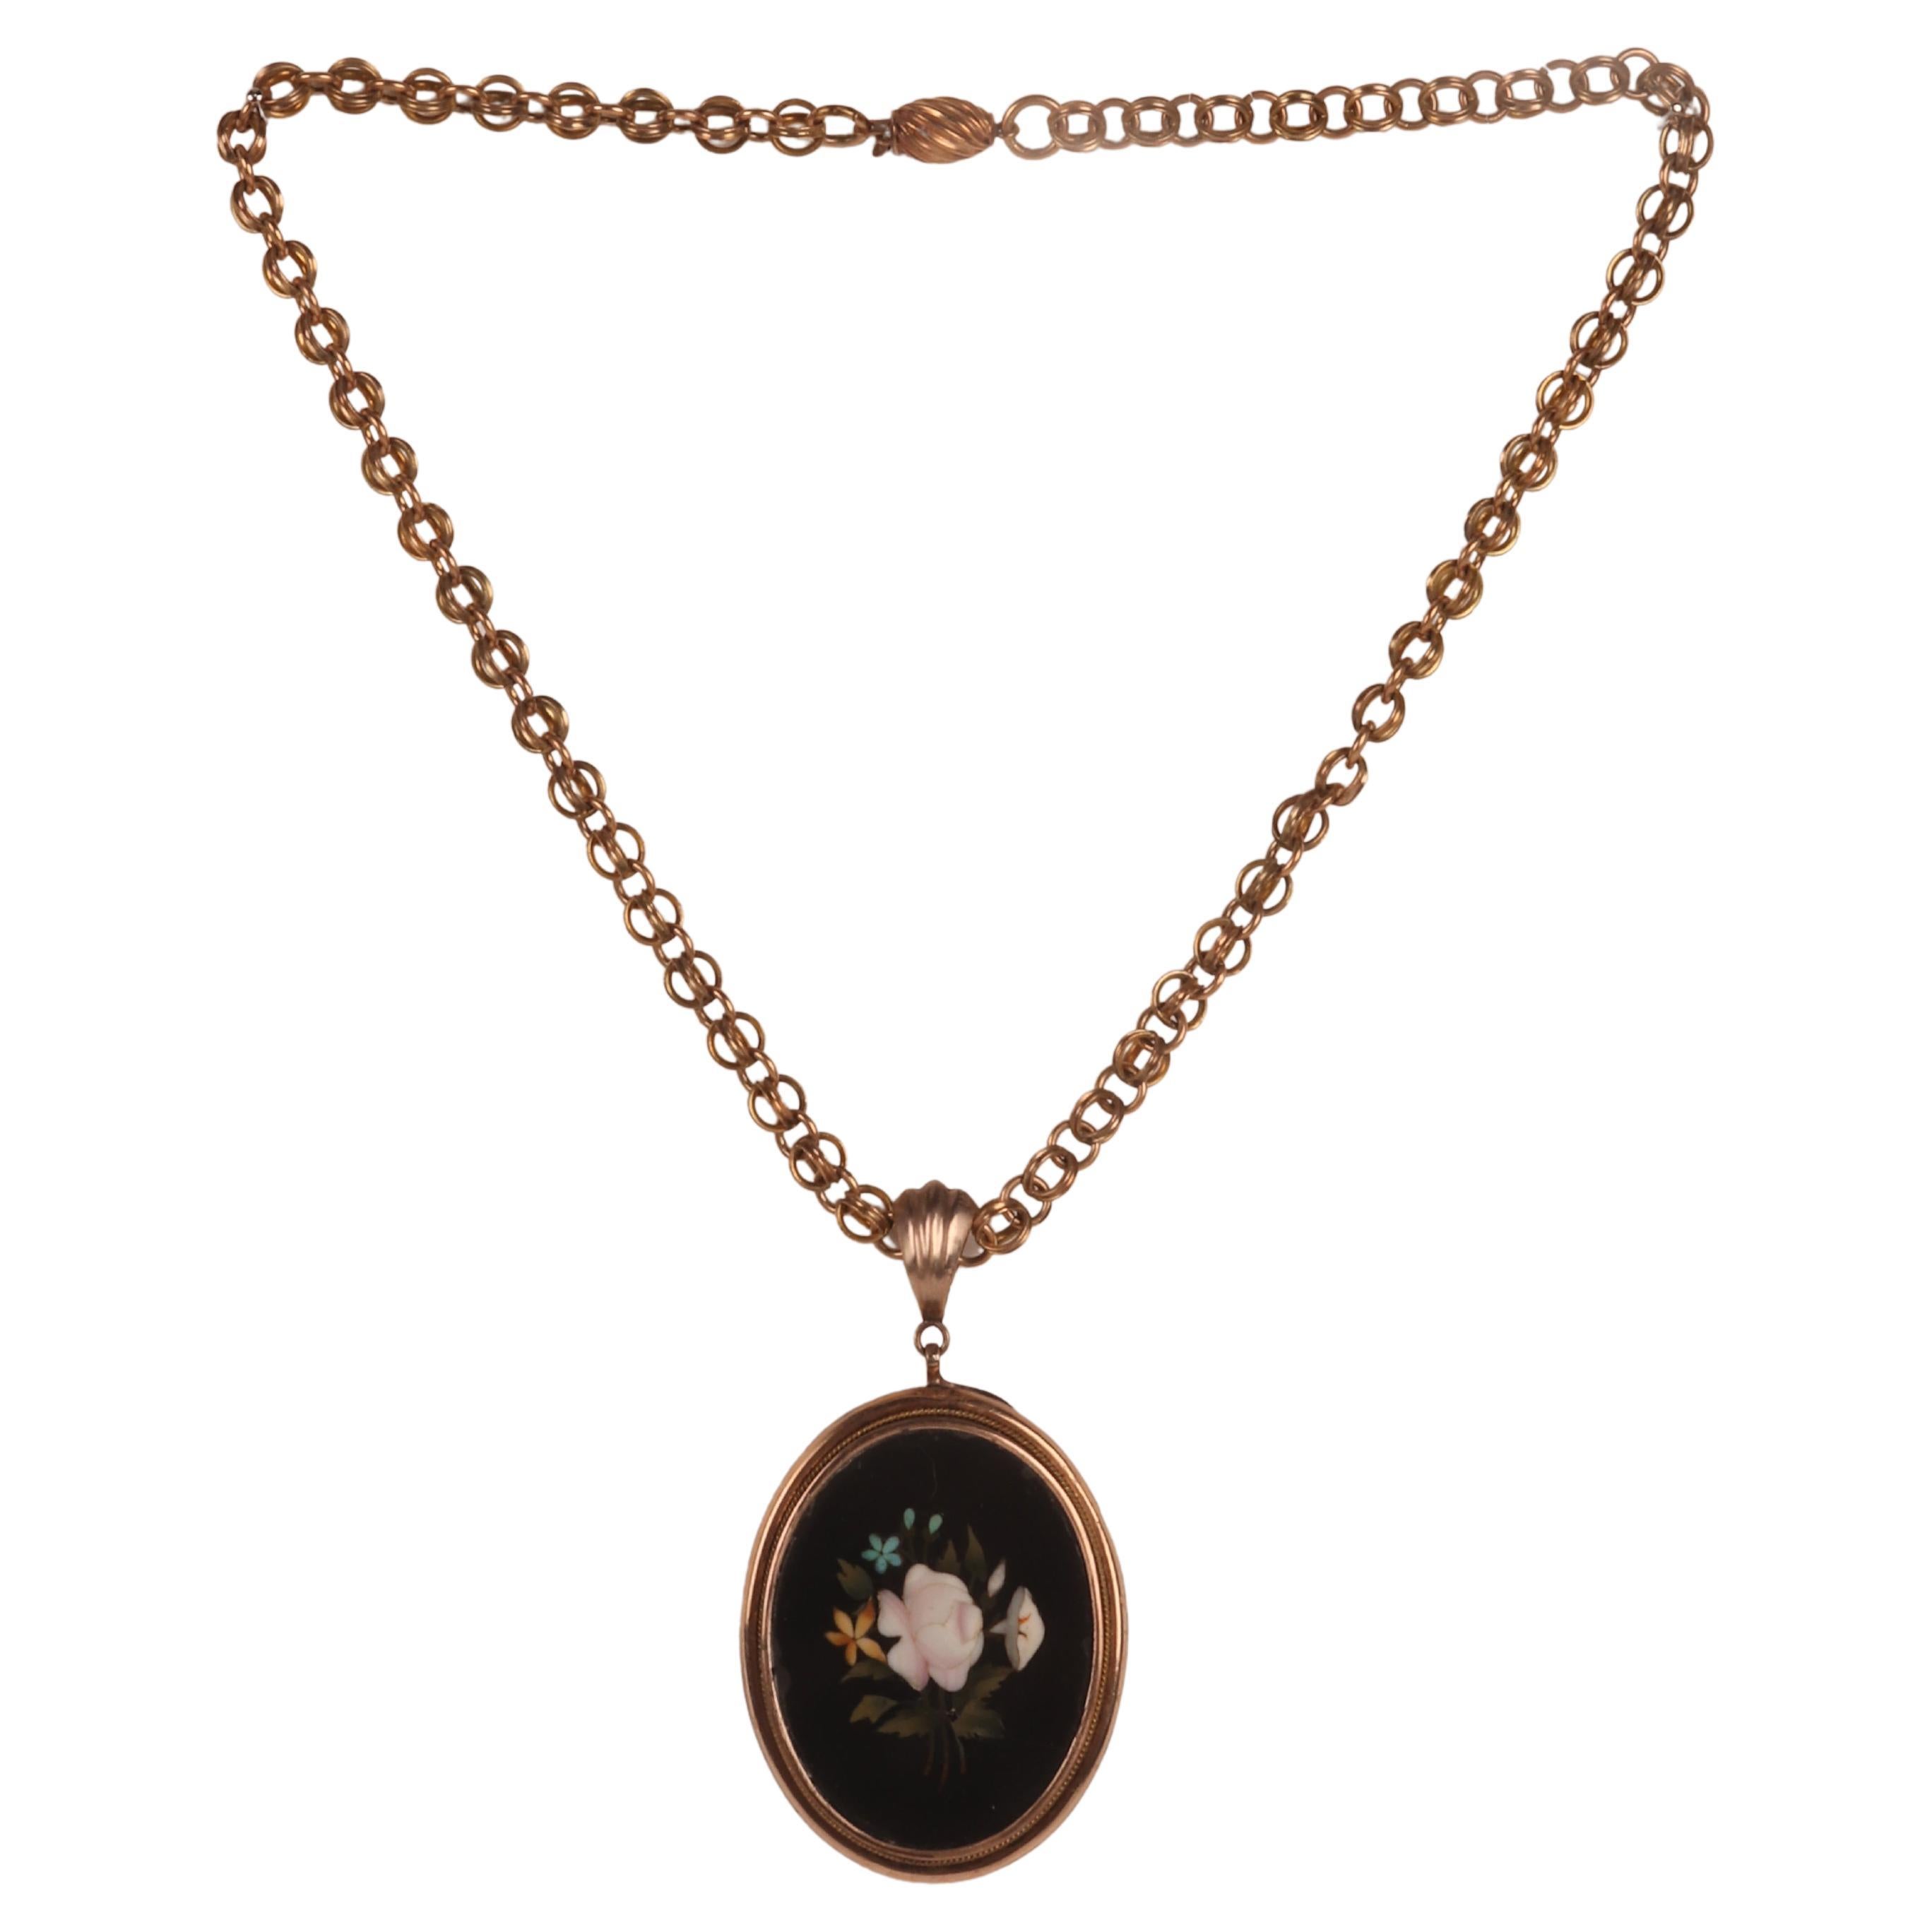 A Victorian gold necklace with a pietradura medallion pendant. England, 1860. For Sale